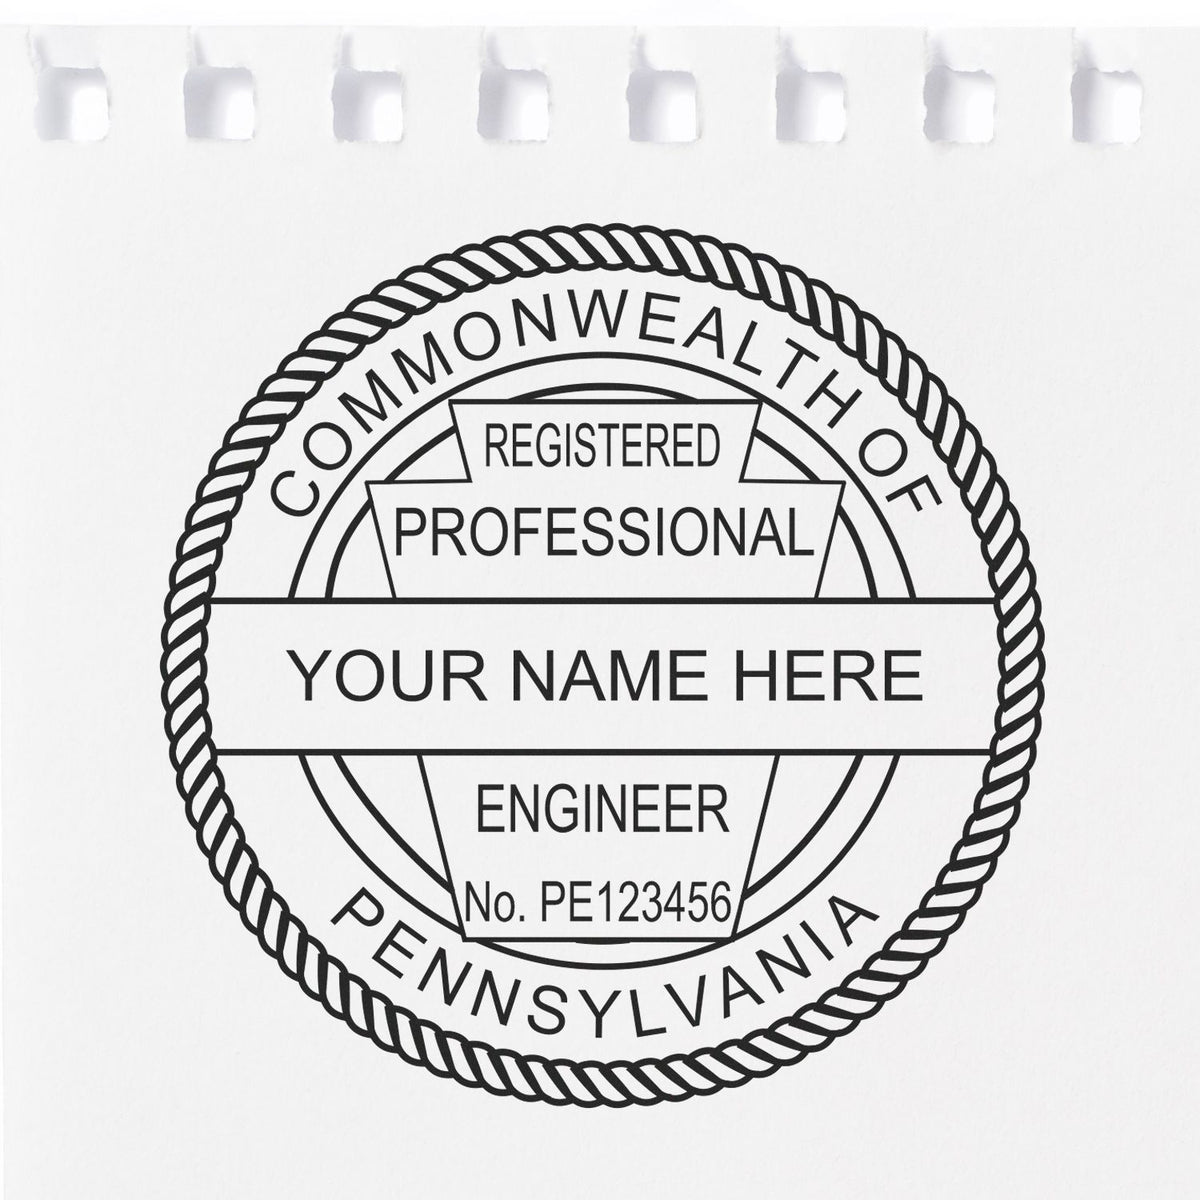 This paper is stamped with a sample imprint of the Pennsylvania Professional Engineer Seal Stamp, signifying its quality and reliability.